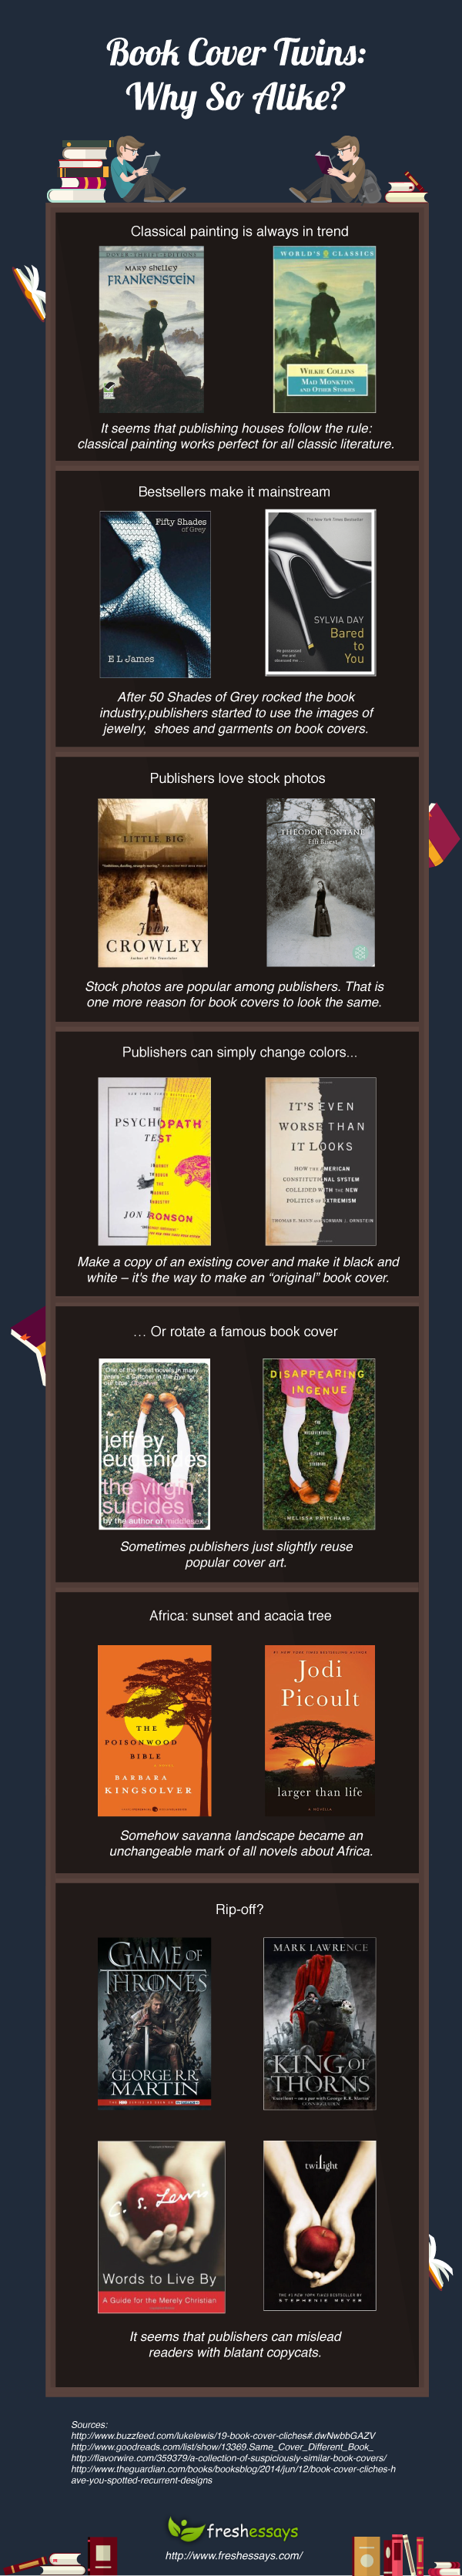 Book Cover Twins Infographic